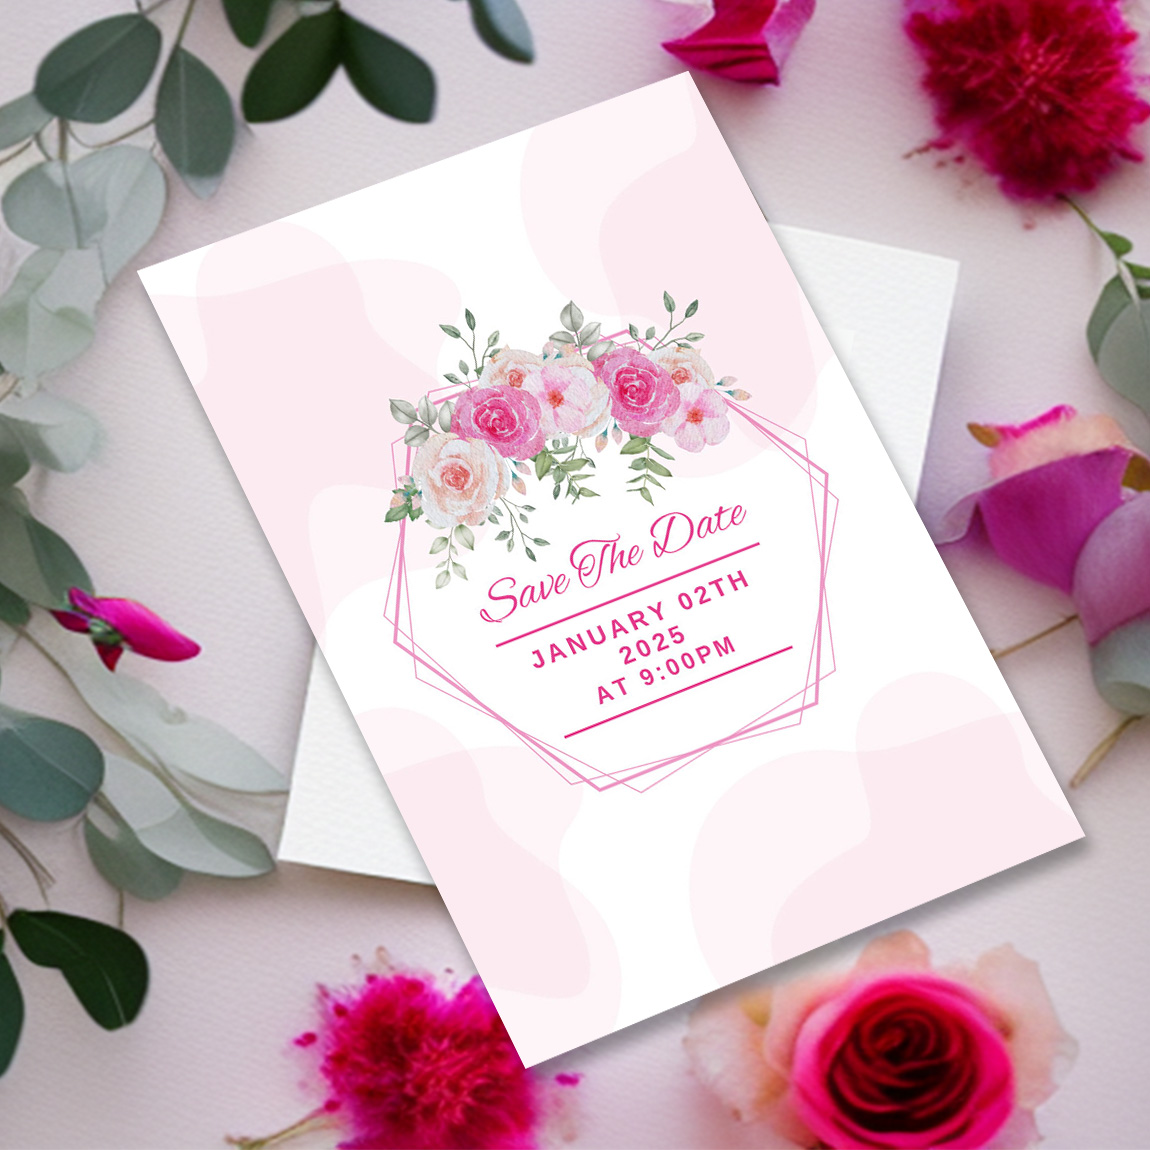 Image with charming wedding invitation in soft pink color.